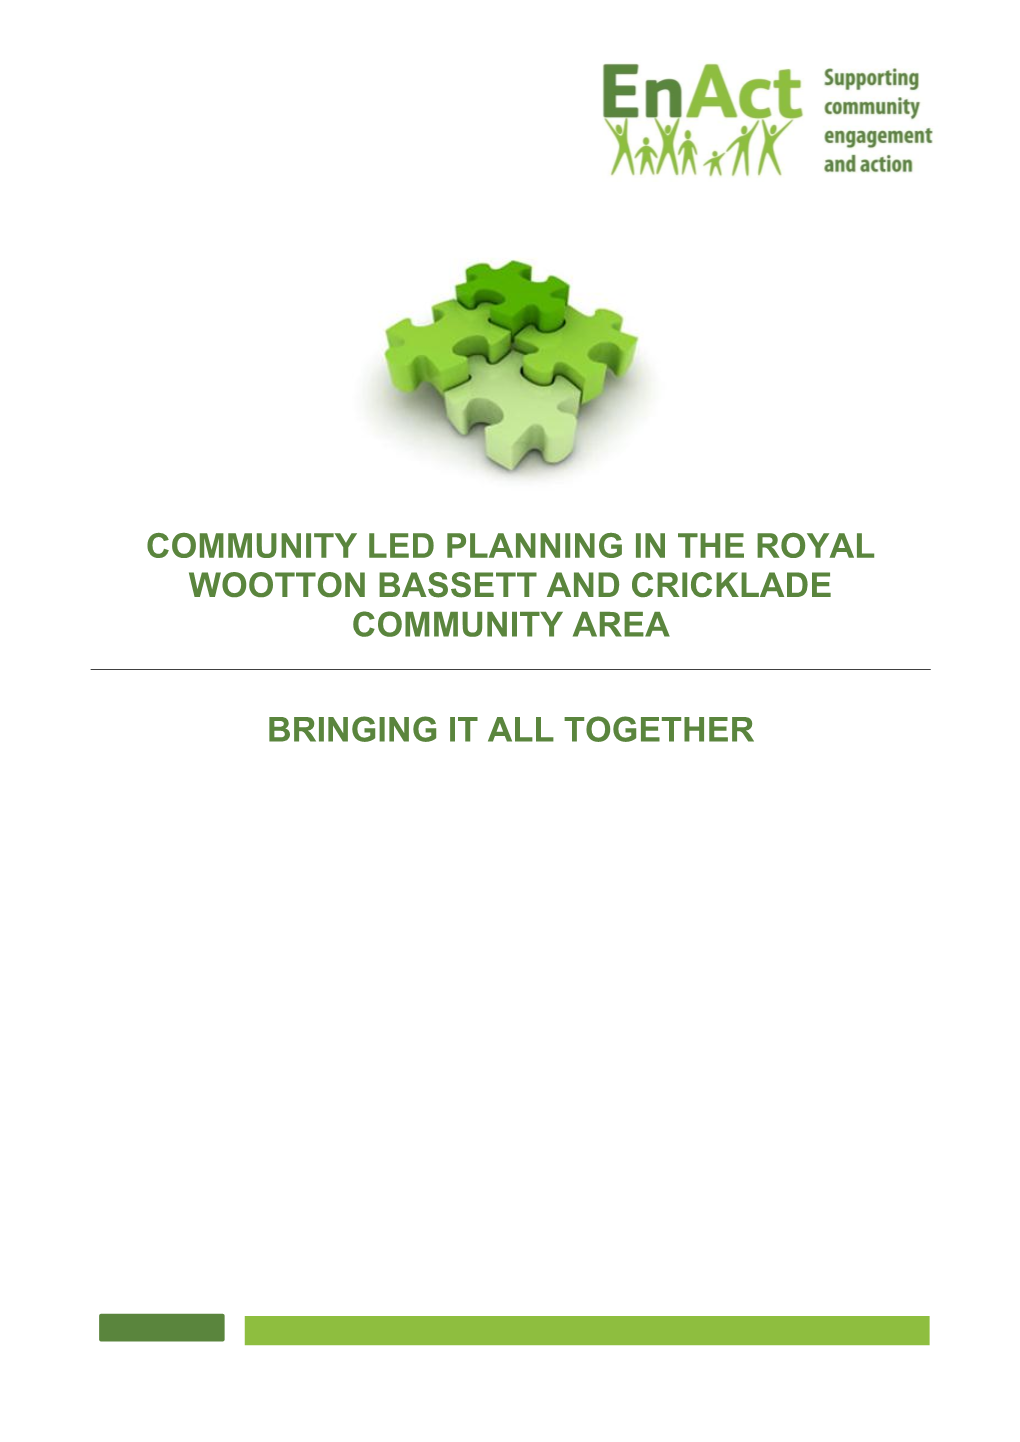 Community Led Planning in the Royal Wootton Bassett and Cricklade Community Area